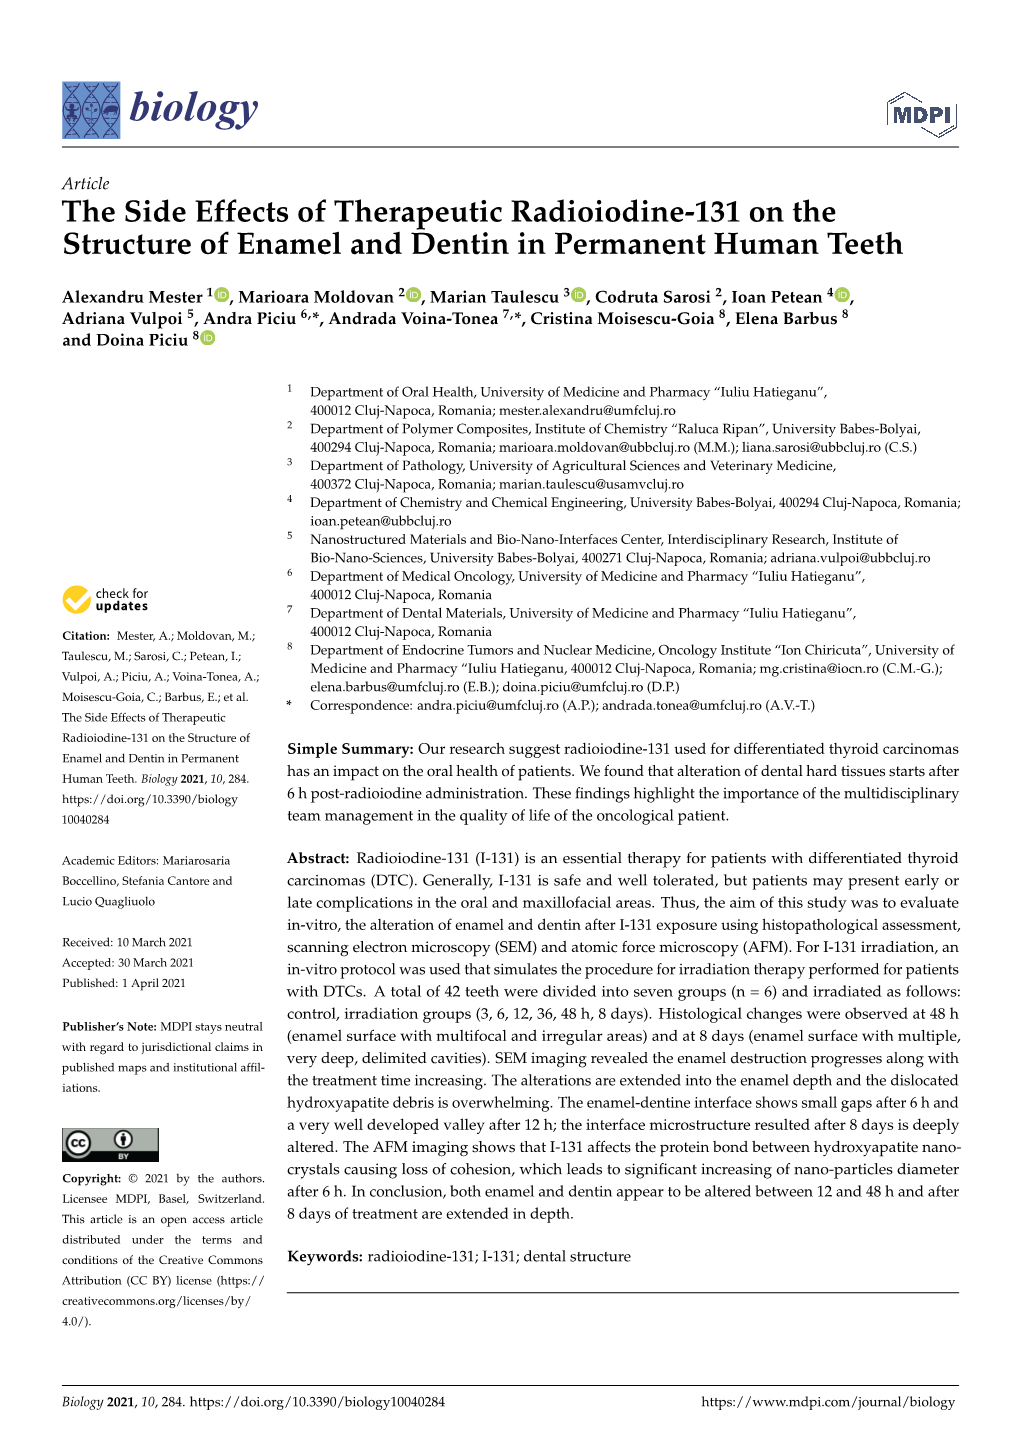 The Side Effects of Therapeutic Radioiodine-131 on the Structure of Enamel and Dentin in Permanent Human Teeth